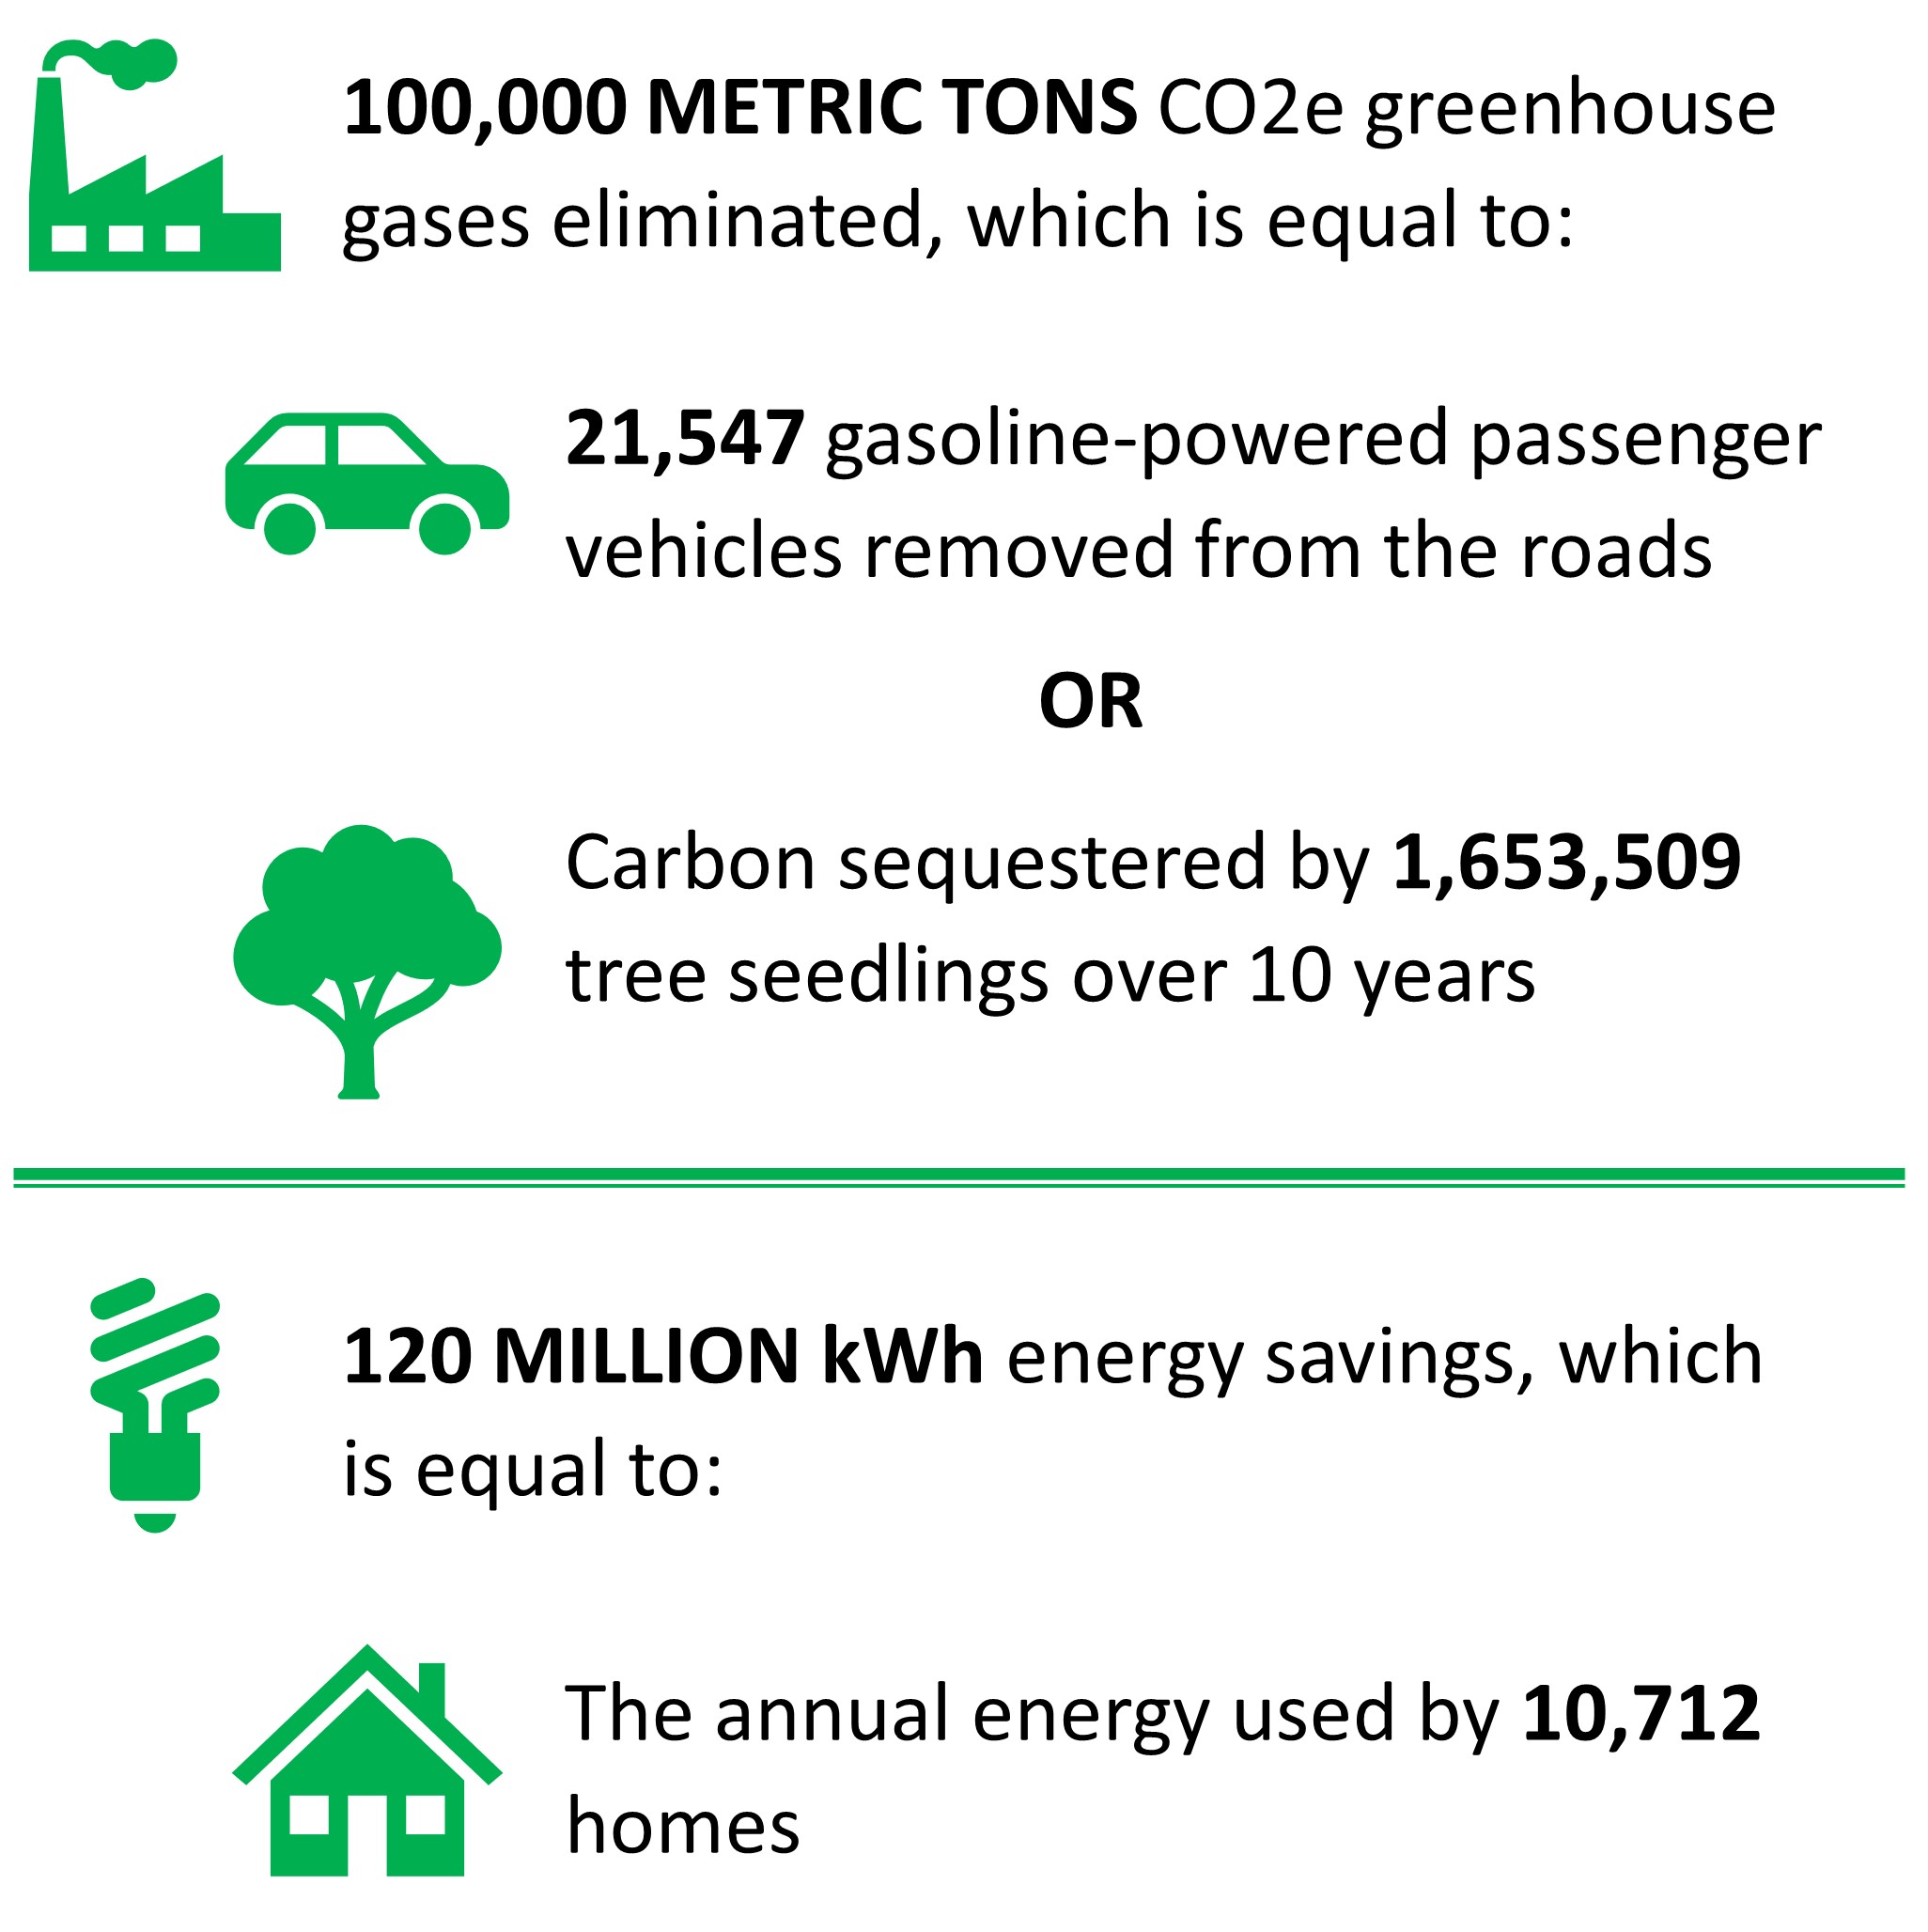 100,000 metric tons carbon dioxide equivalent greenhouse gases eliminated, which is equal to: 21,547 gasoline-powered passenger vehicles removed from the roads or carbon sequestered by 1,653,509 tree seedlings over 10 years.  120 million kilowatt hours energy savings, which is equal to: the annual energy used by 10,712 homes.